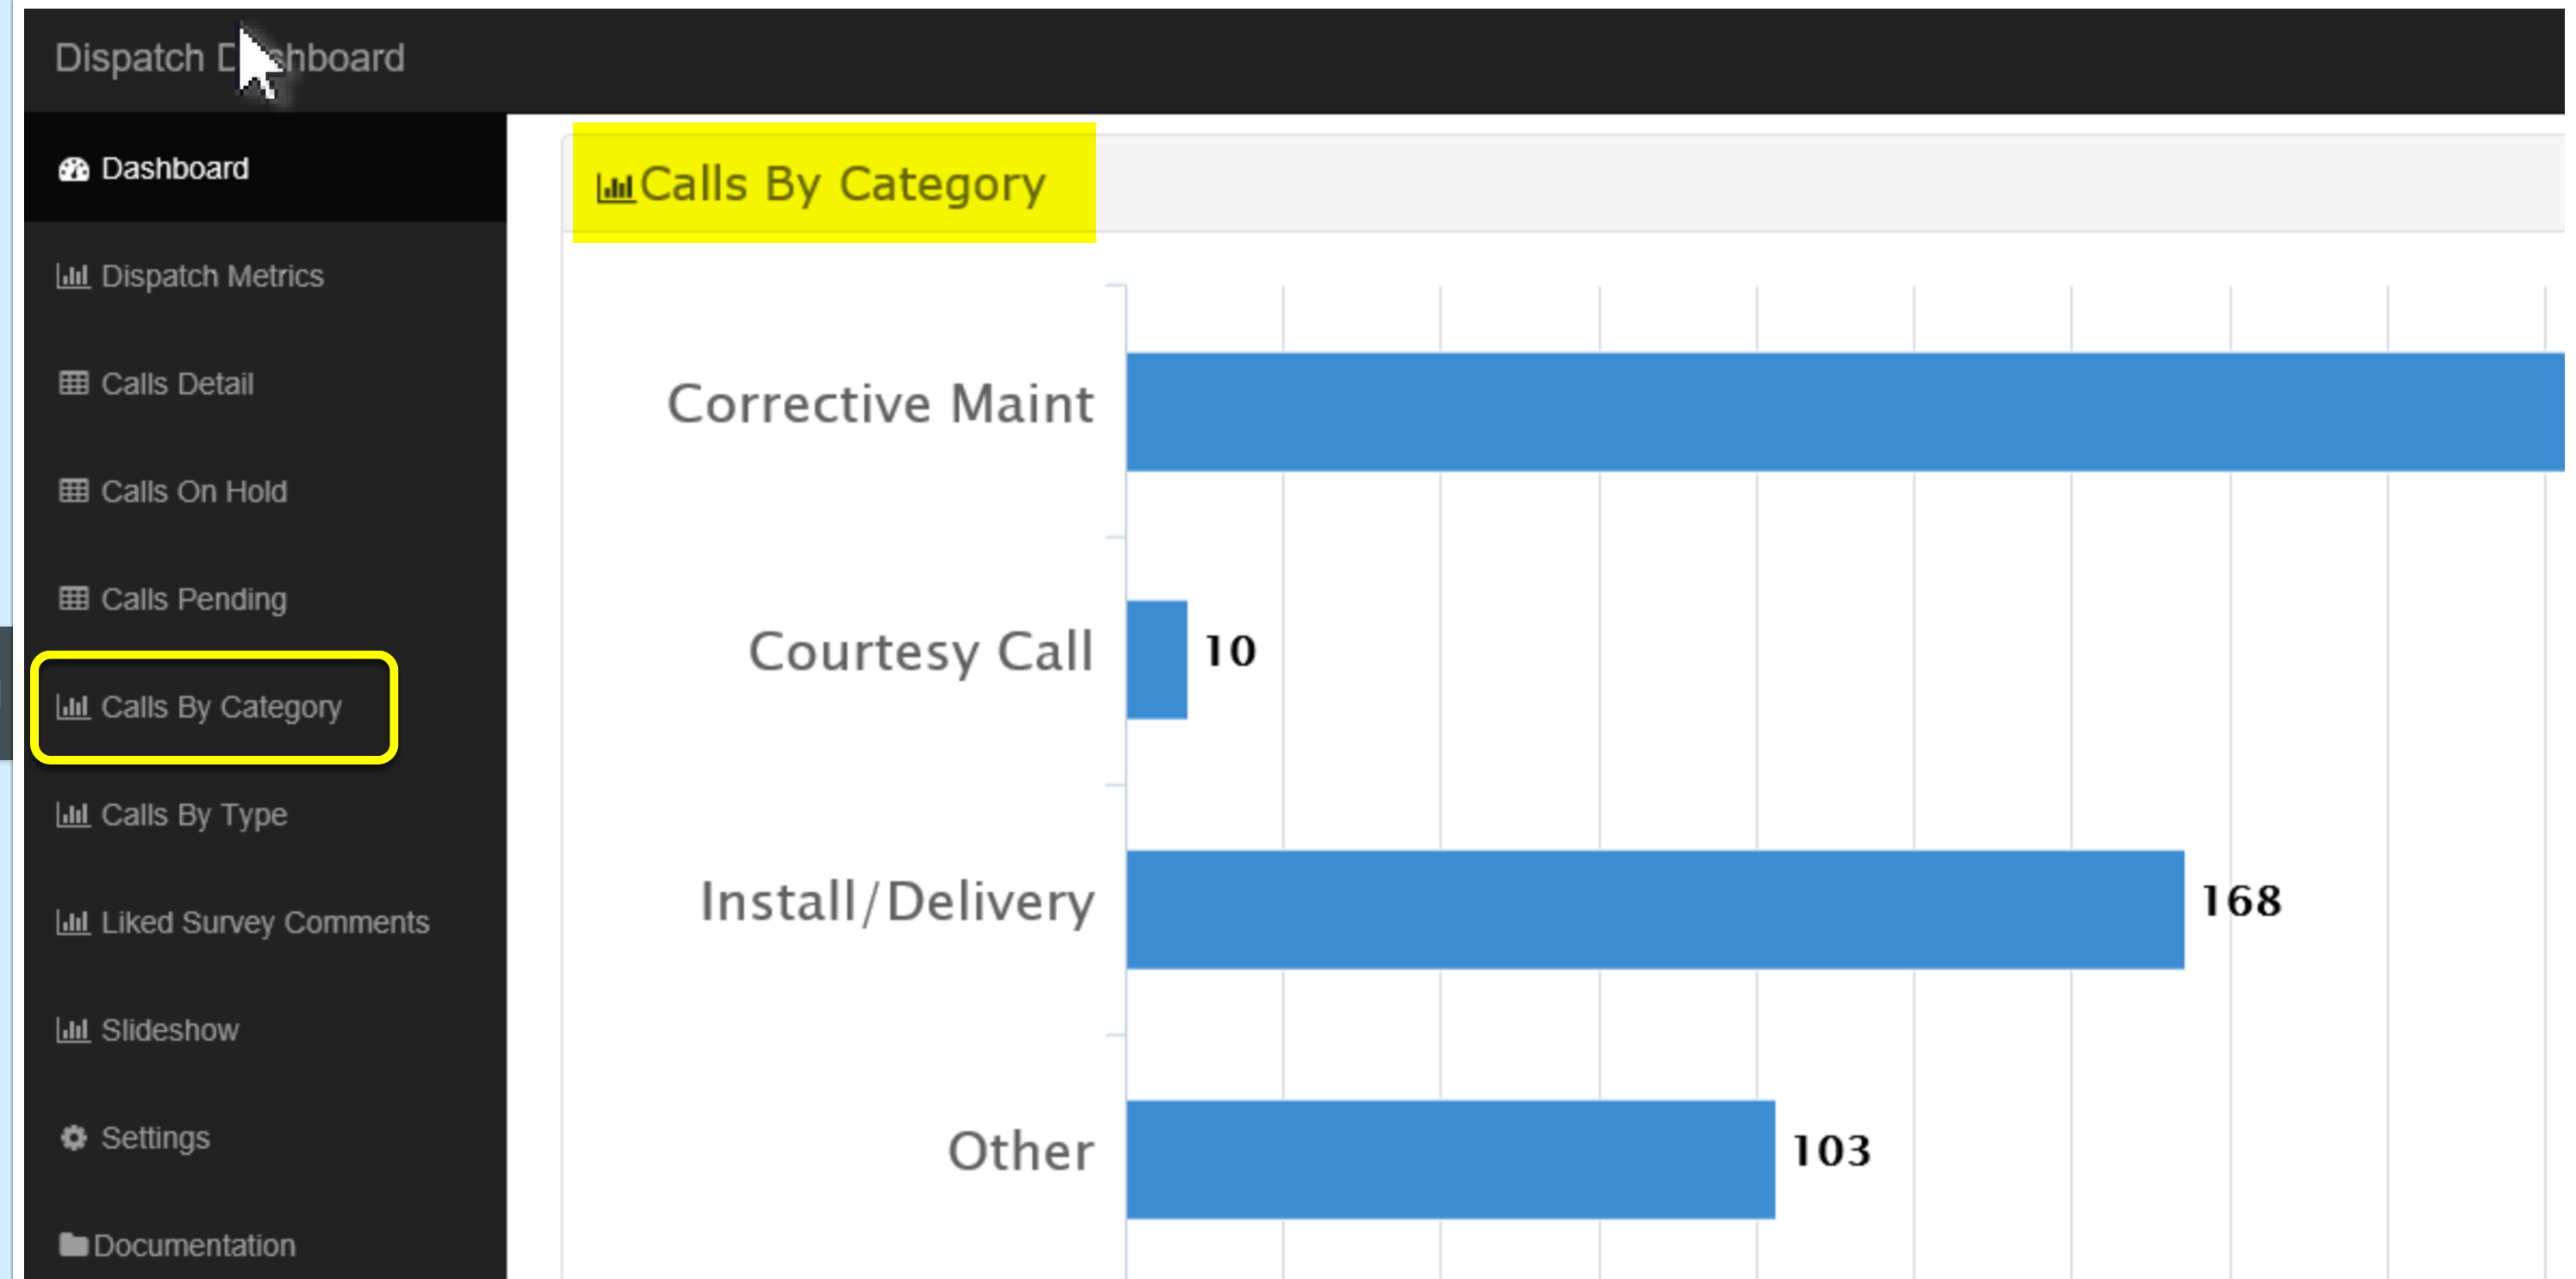 Calls_By_Category.PNG